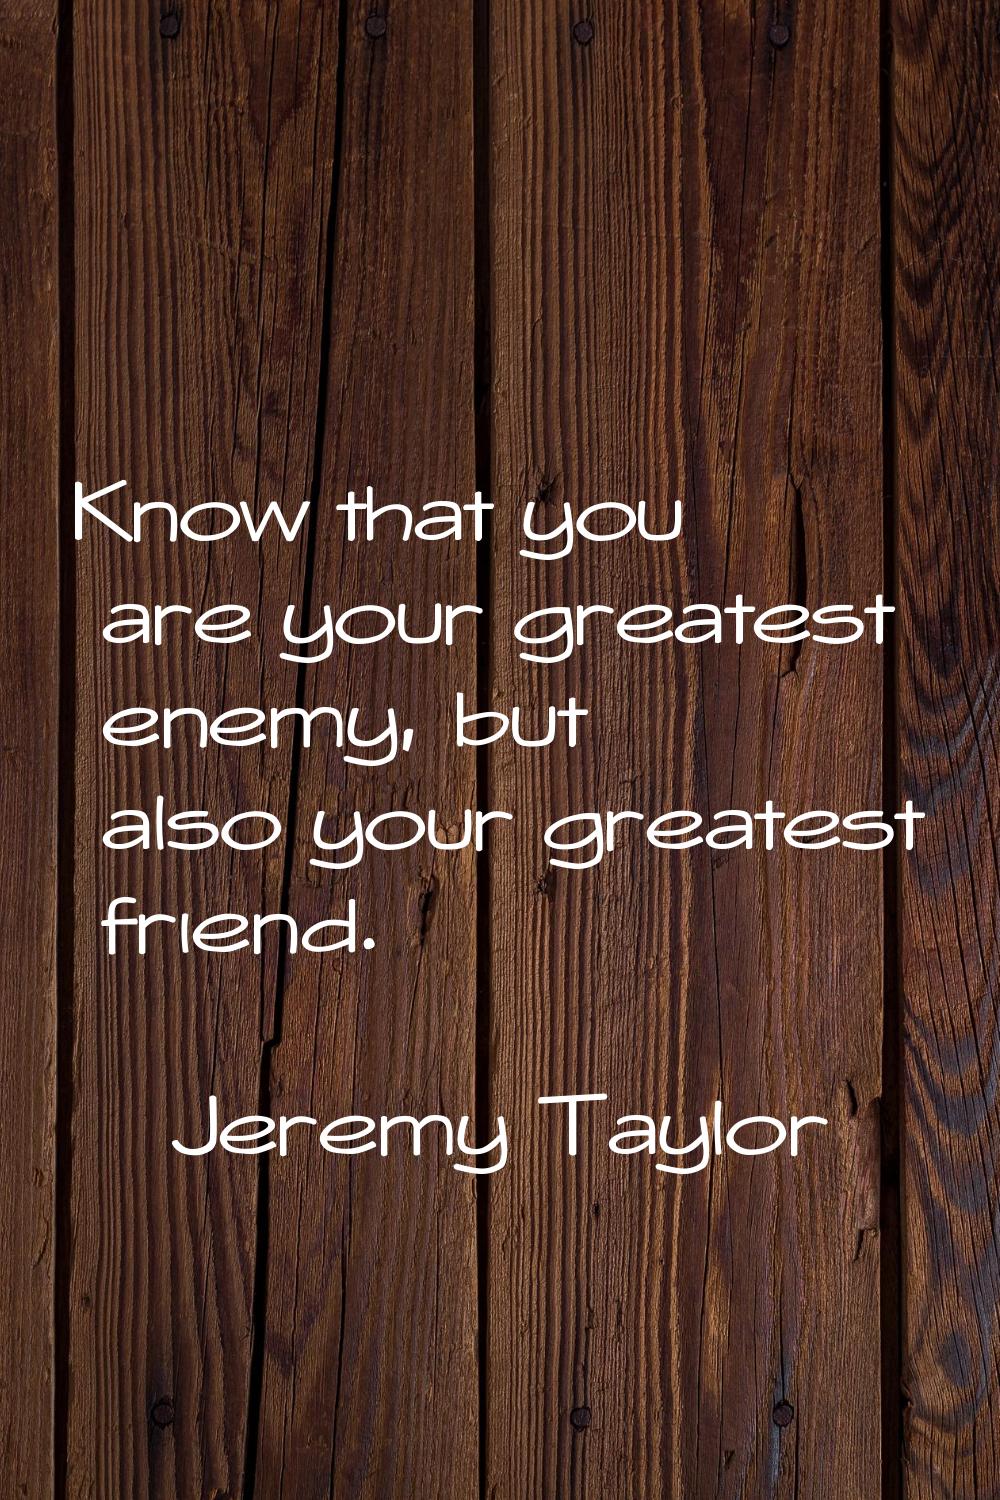 Know that you are your greatest enemy, but also your greatest friend.